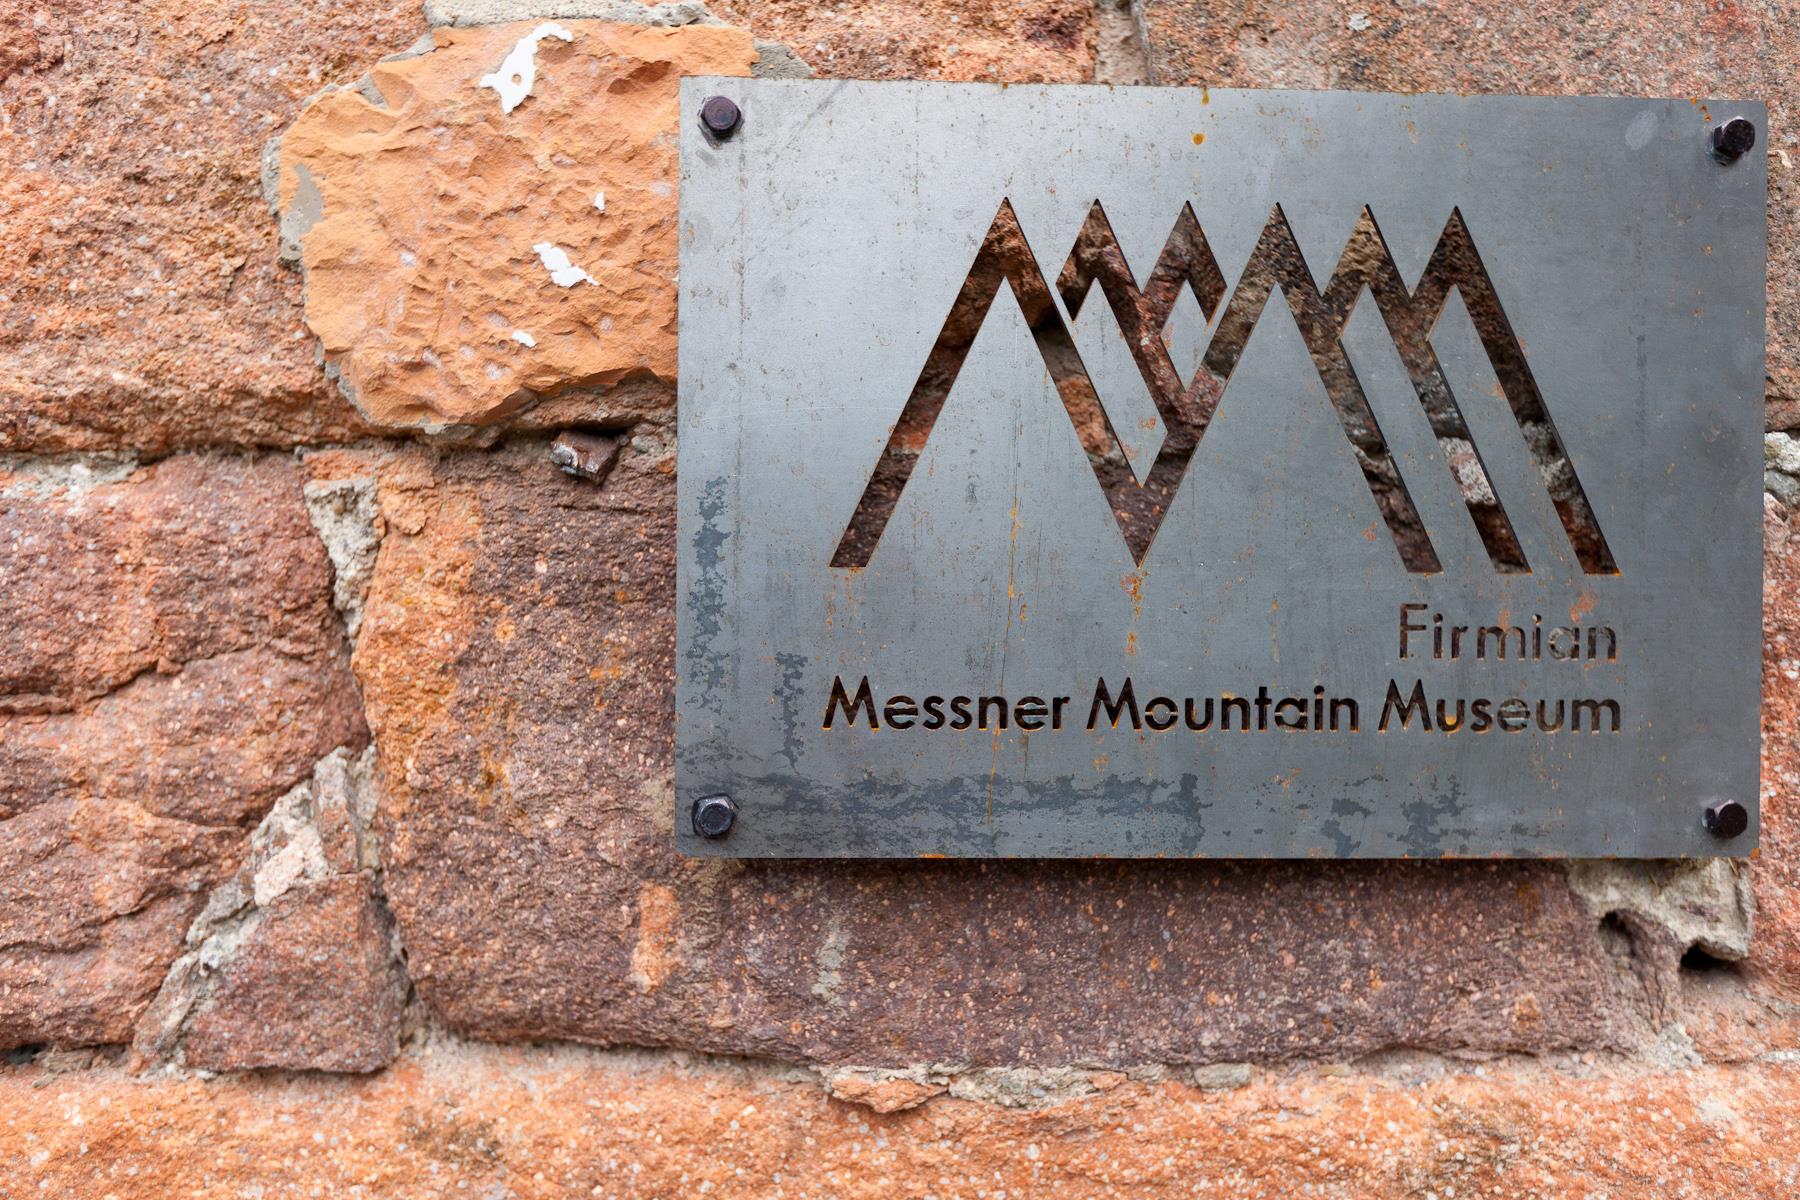 Messner Mountain Museum Firmiano